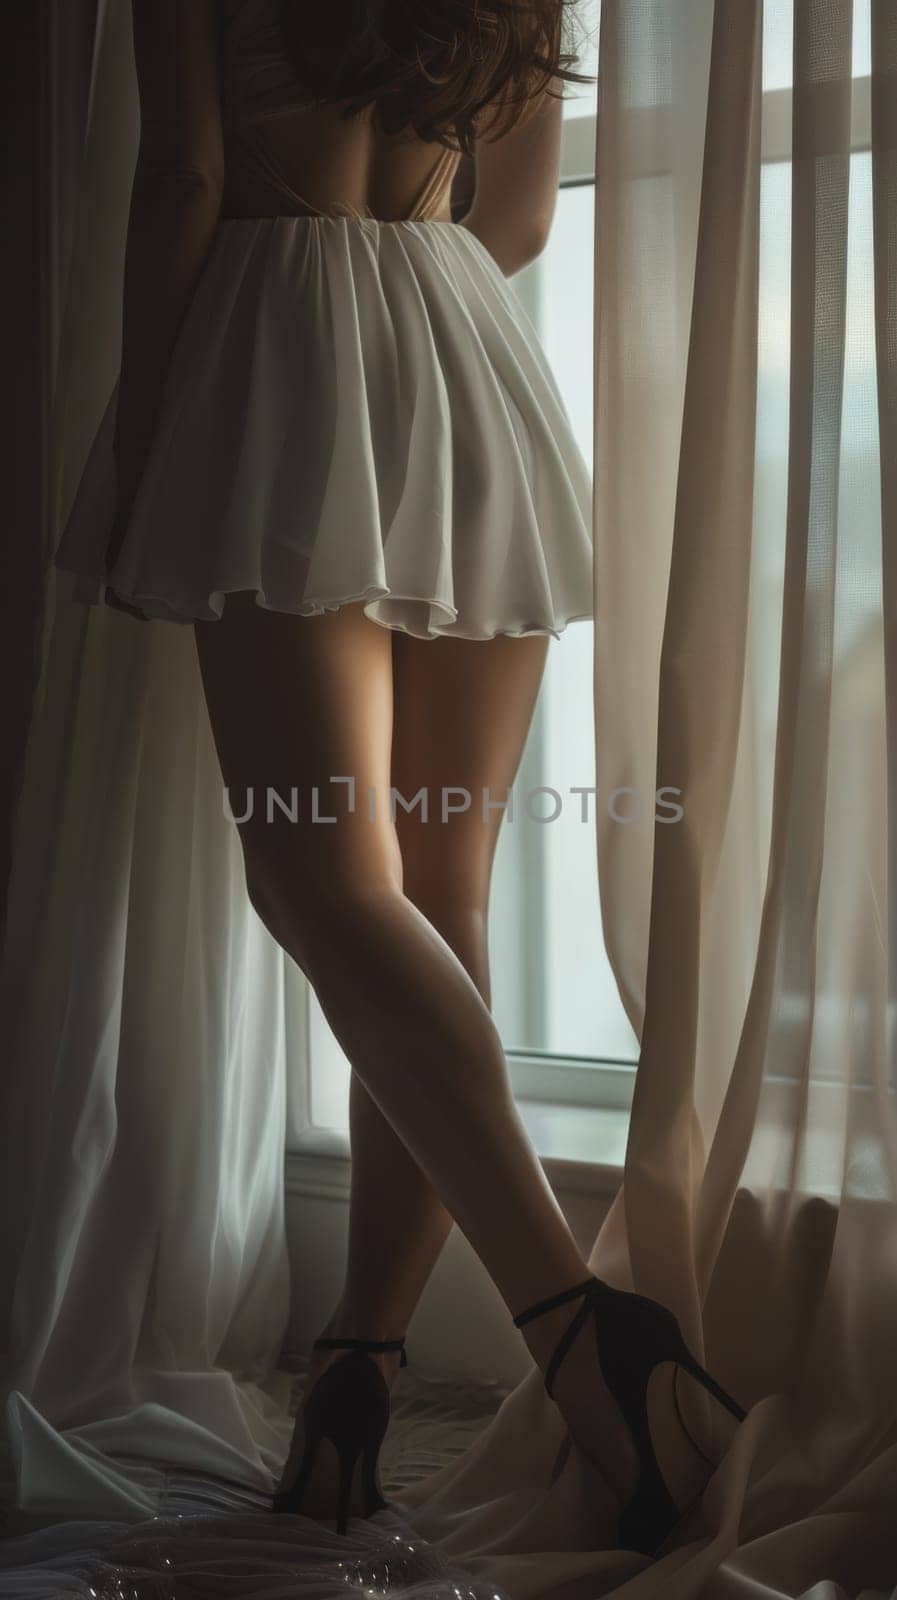 A woman in a short skirt and high heels standing by the window, AI by starush